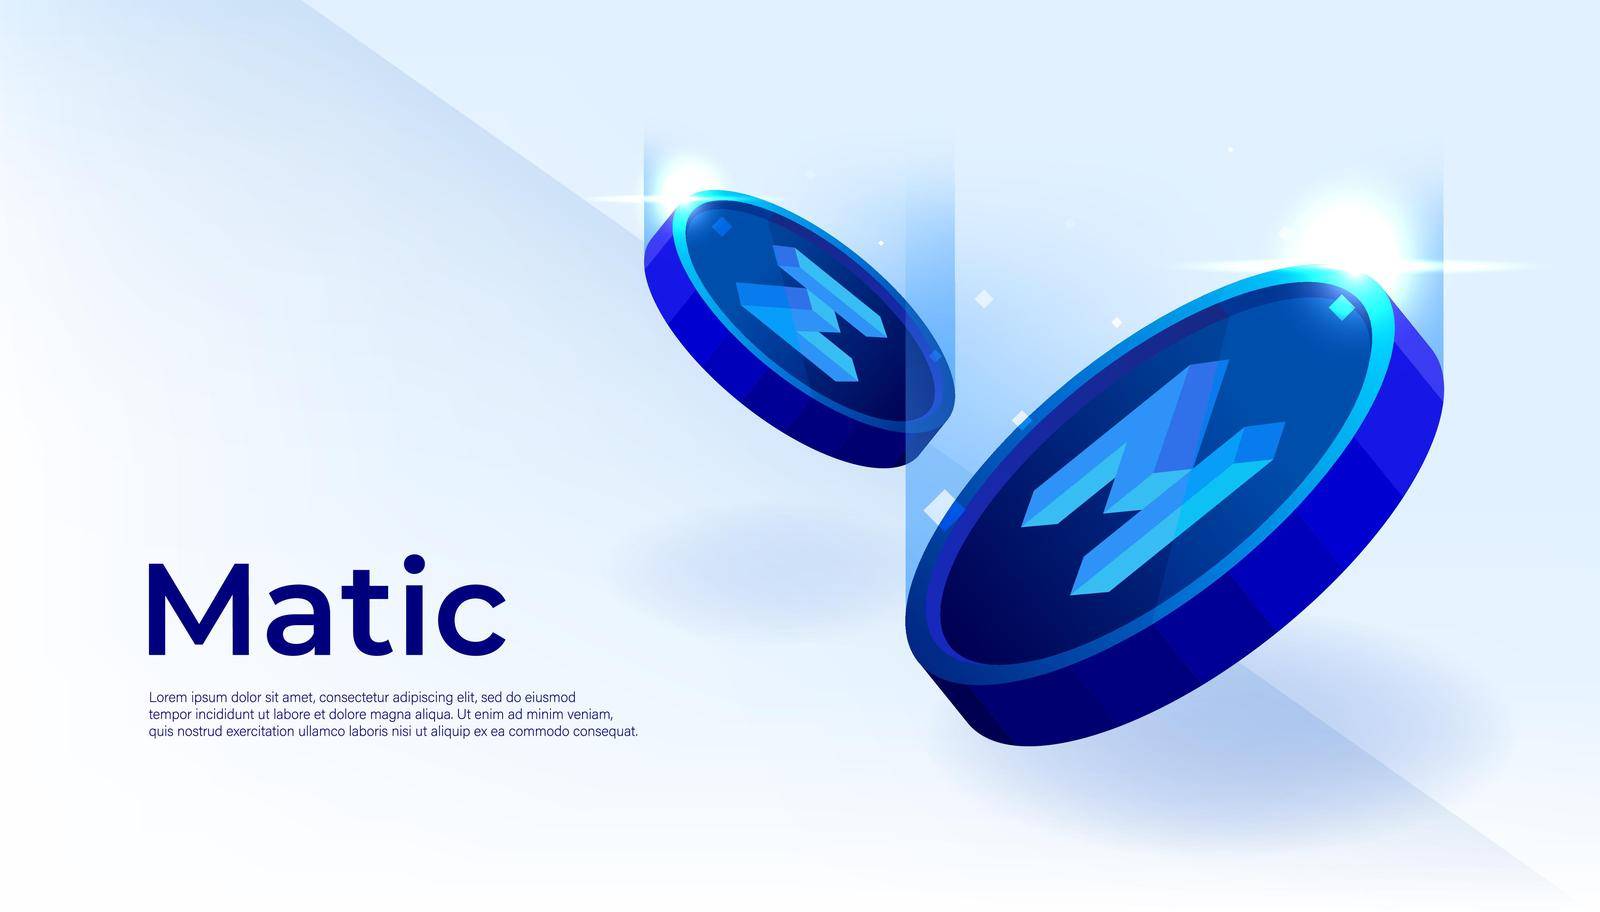 Polygon (MATIC) banner. MATIC coin cryptocurrency concept banner background.